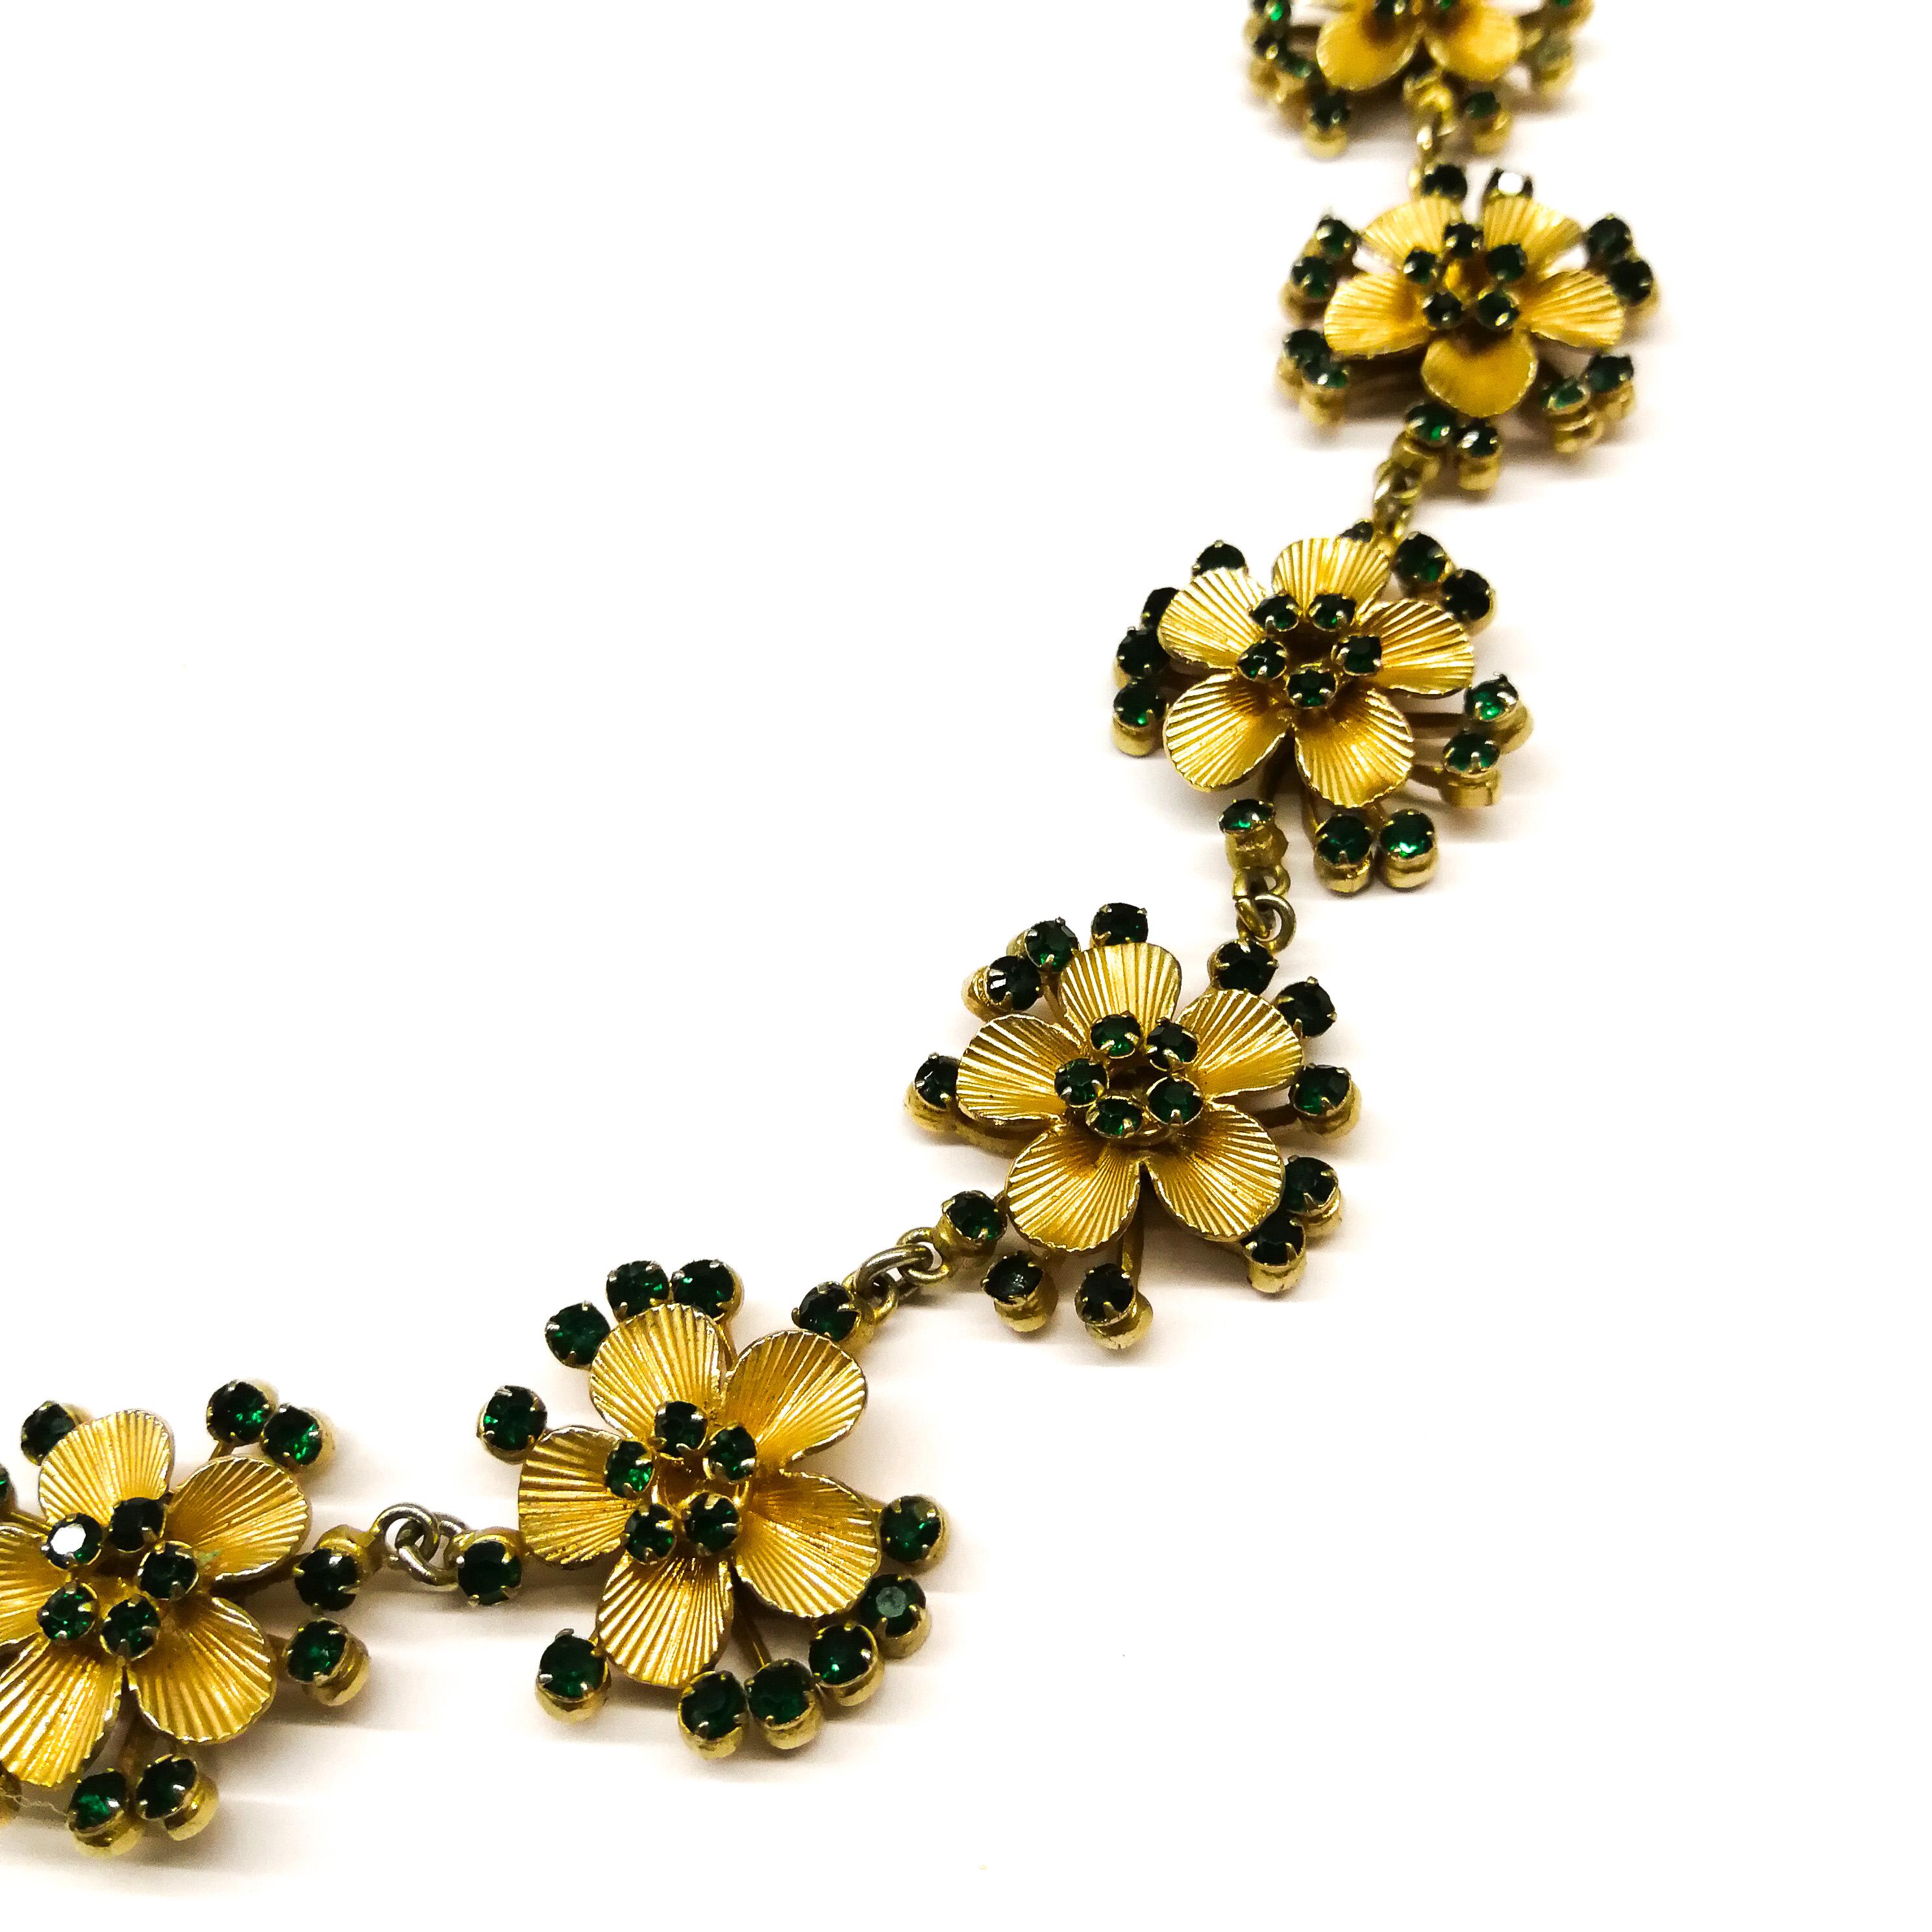 A very pretty necklace made by Henkel and Grosse  for Christian Dior in Germany, made from soft gilded metal and gently sparkling emerald pastes. Set on individual gilt 'stamens', each paste is claw set, creating a small flower motif. This rare